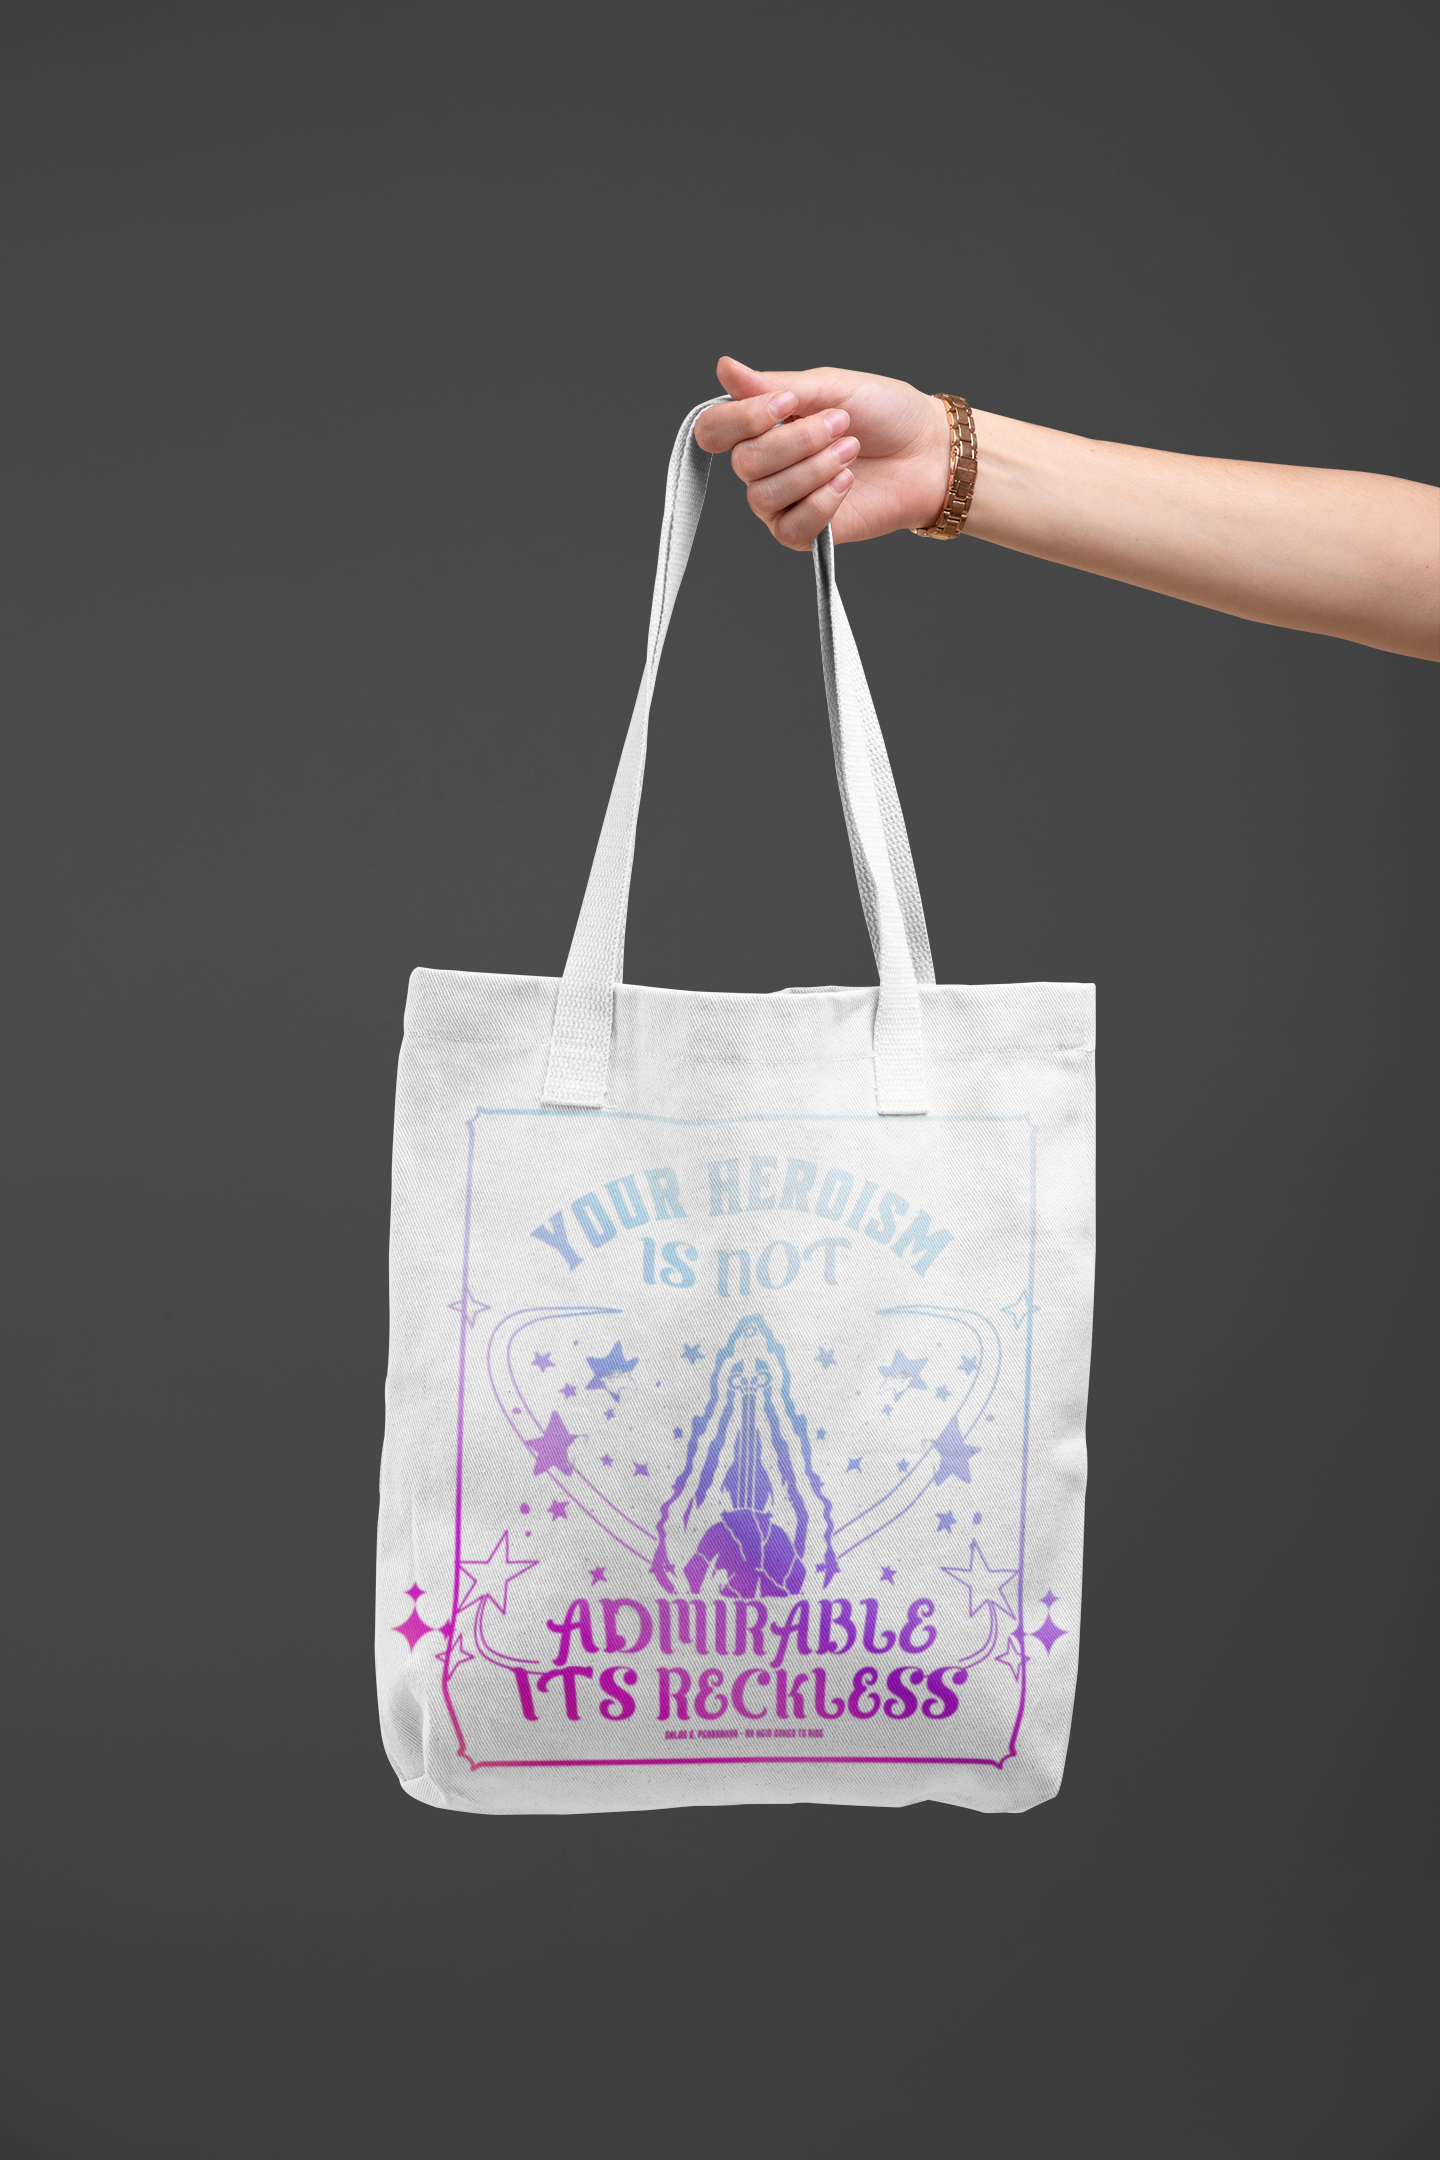 Your Heroism is Not Admirable - Chloe C. Penaranda - Officially Licensed - Tote - An Heir Comes to Rise - AHCTR